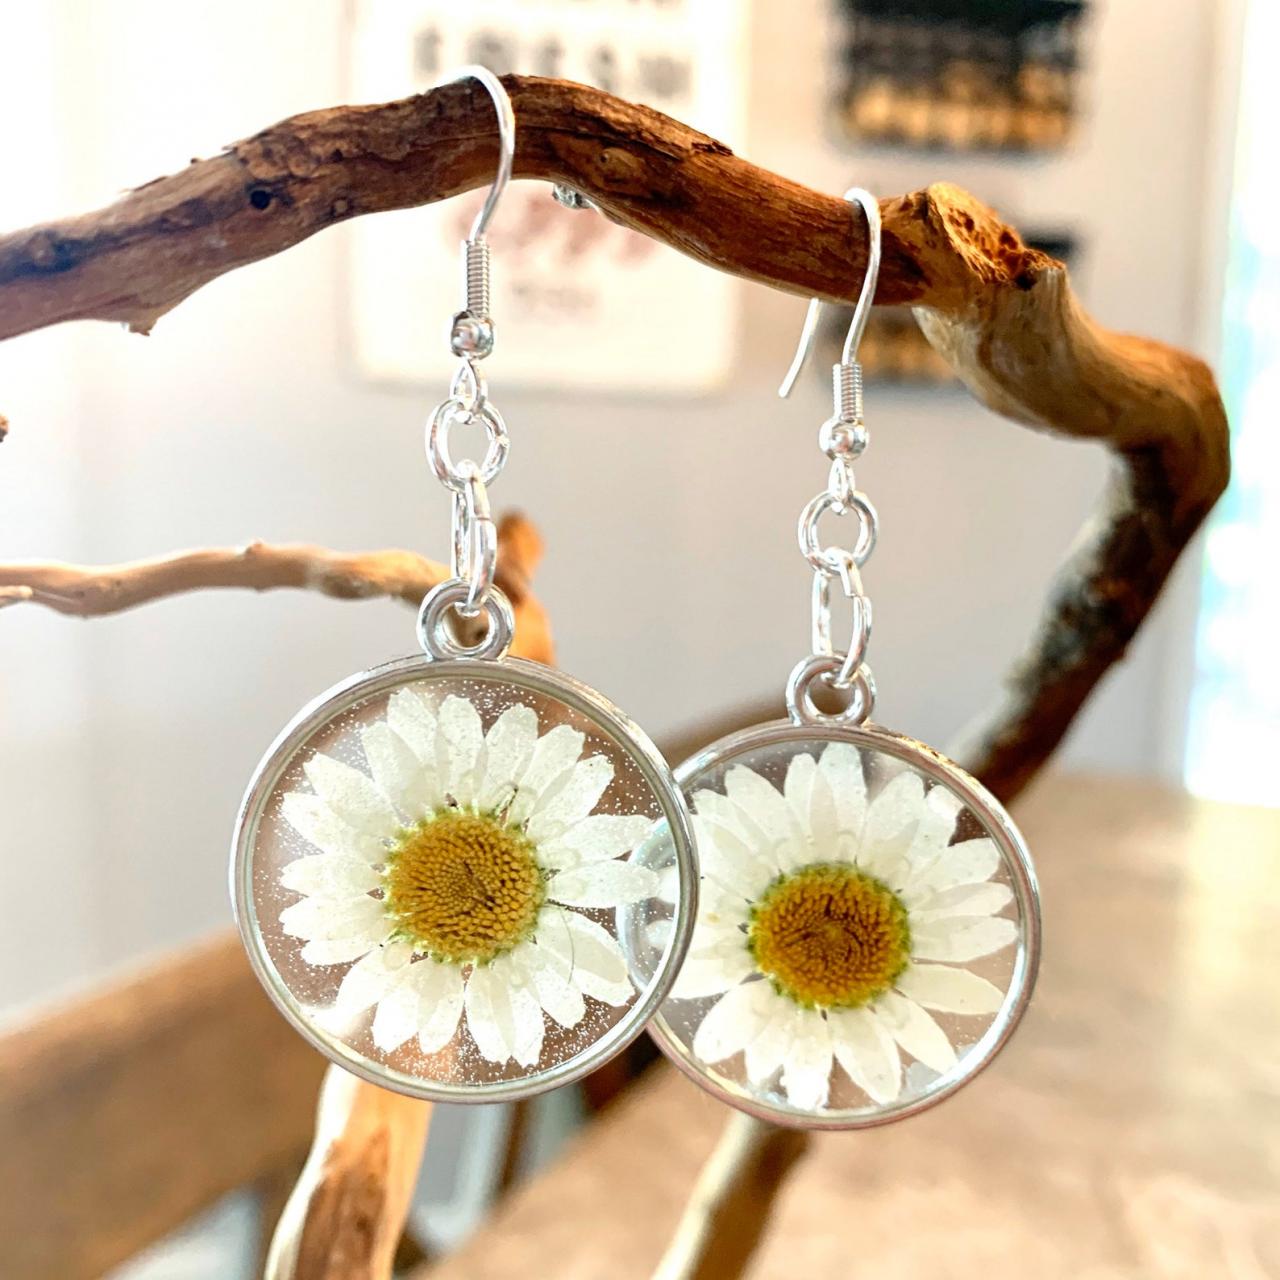 Pressed Daisy Flowers Earrings, Resin Flower Jewelry, Unique Gift For Grad,preserved Flowers, Boho, Minimalist Jewelry Gifts, Nature Gift,